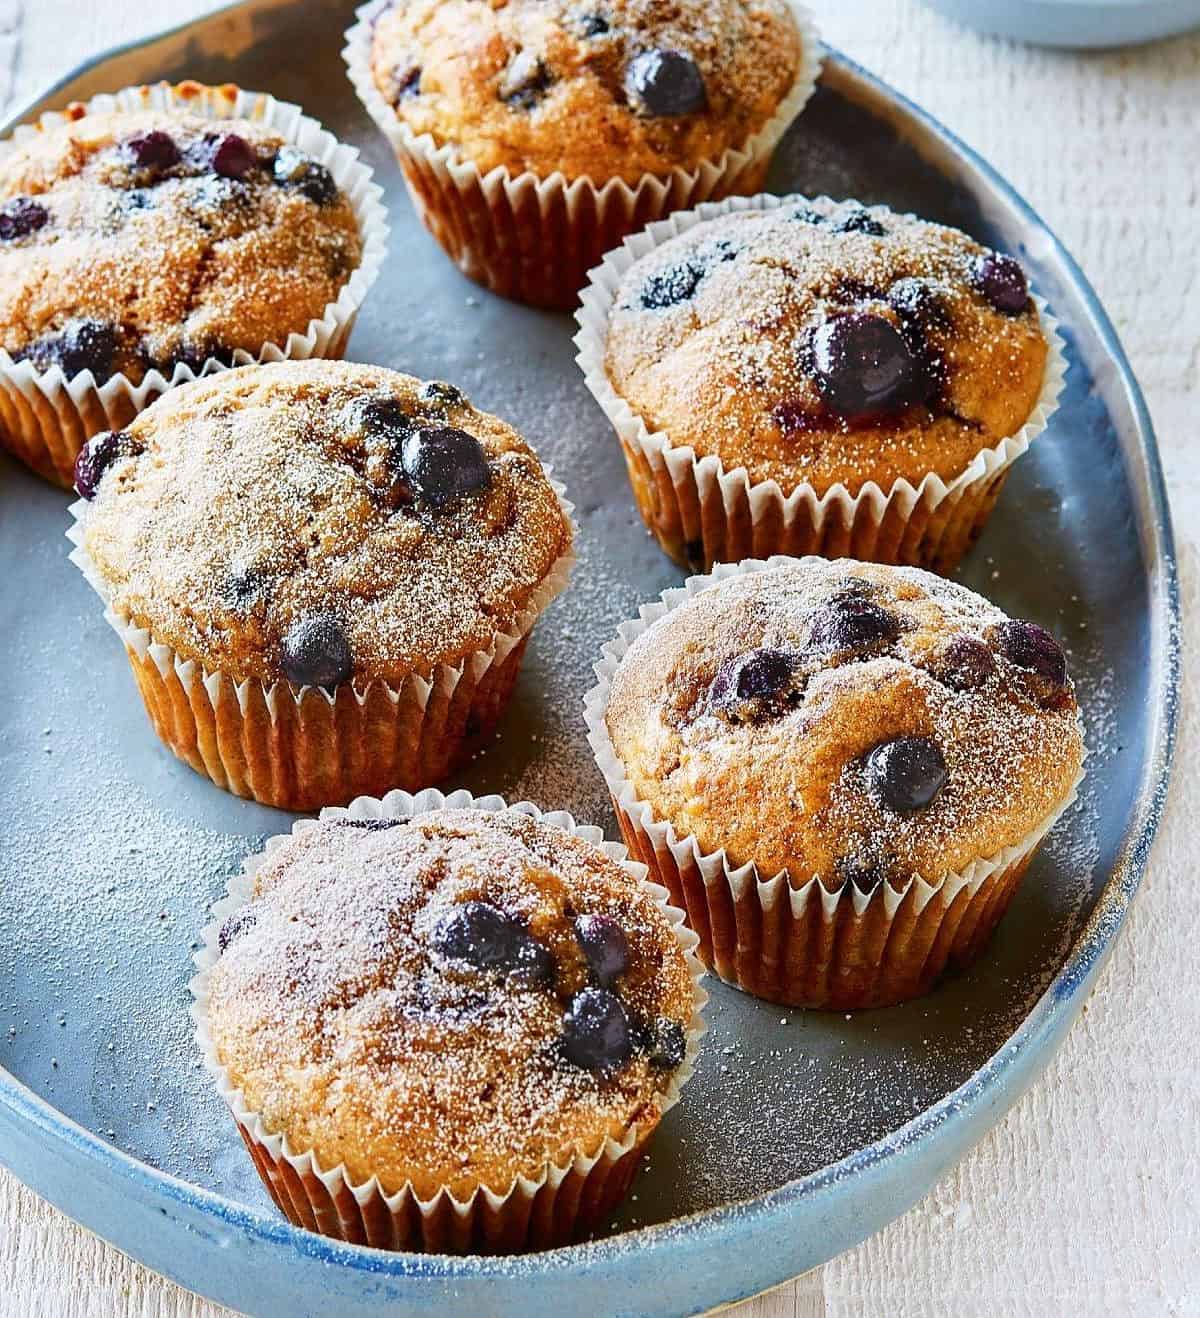   Picture-perfect muffins with perfectly golden tops and colorful berry pieces dotting the insides.